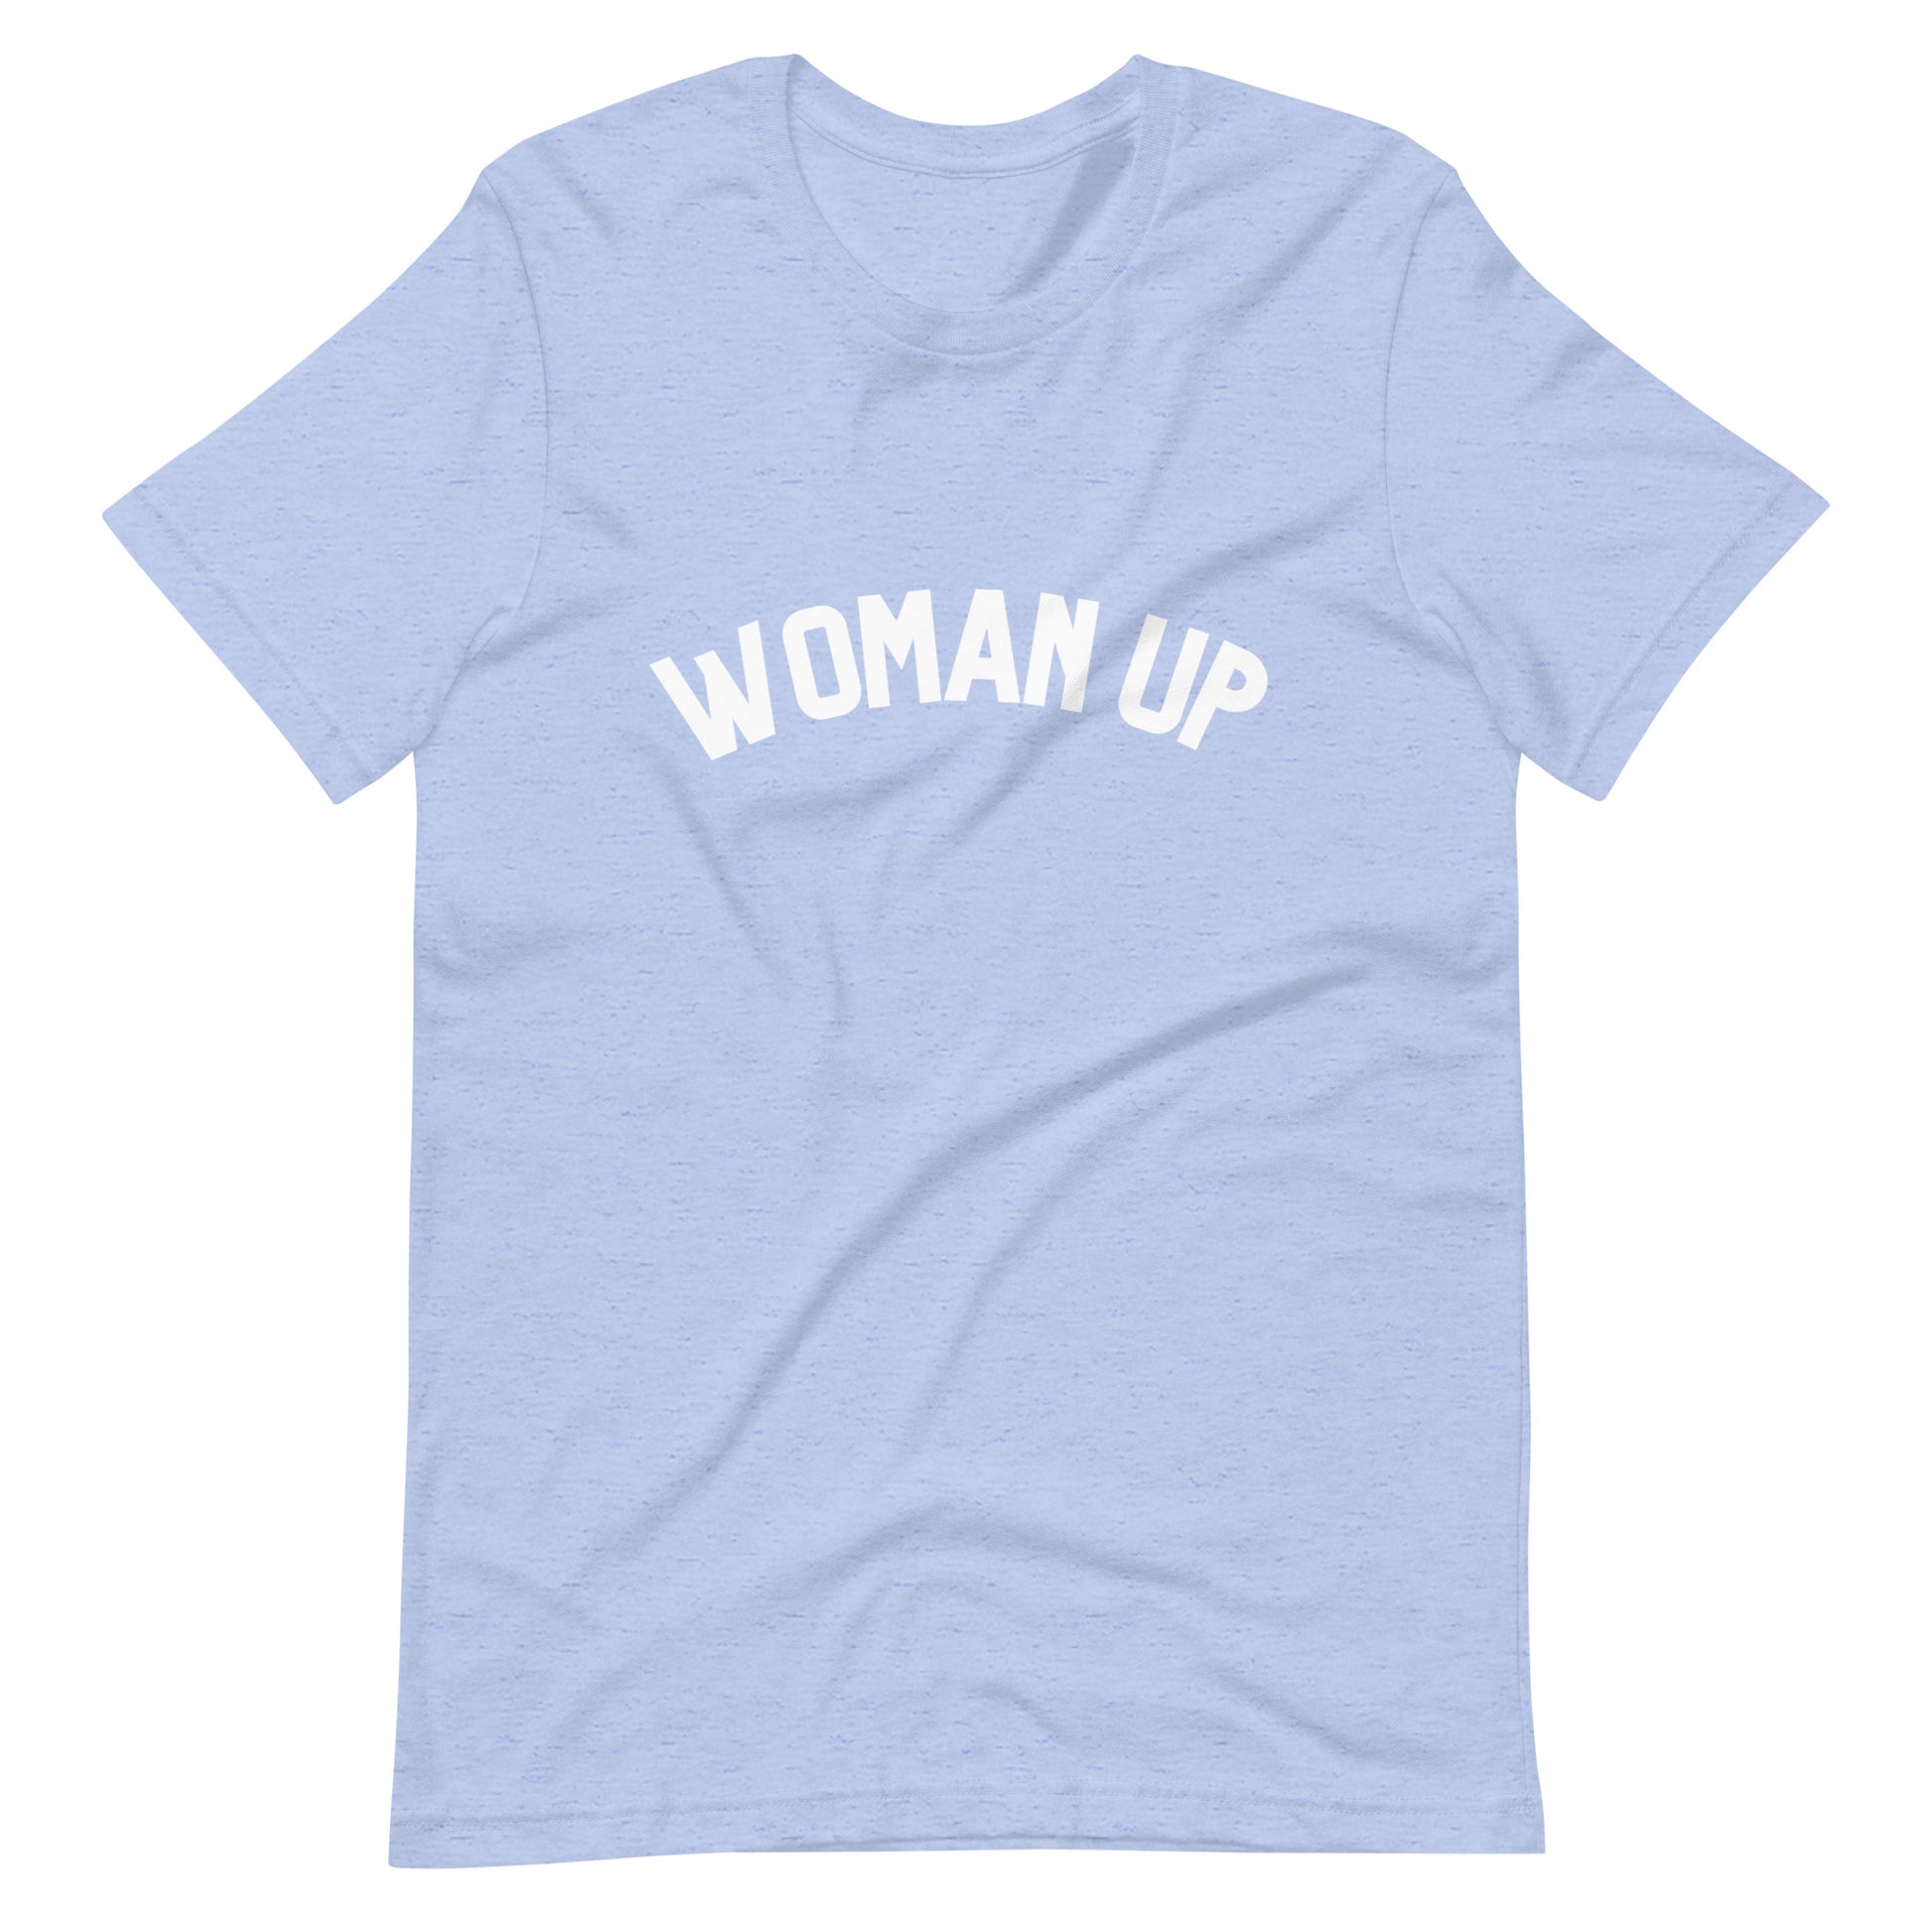 Woman Up t-shirt - Bad Perfectionist Co.